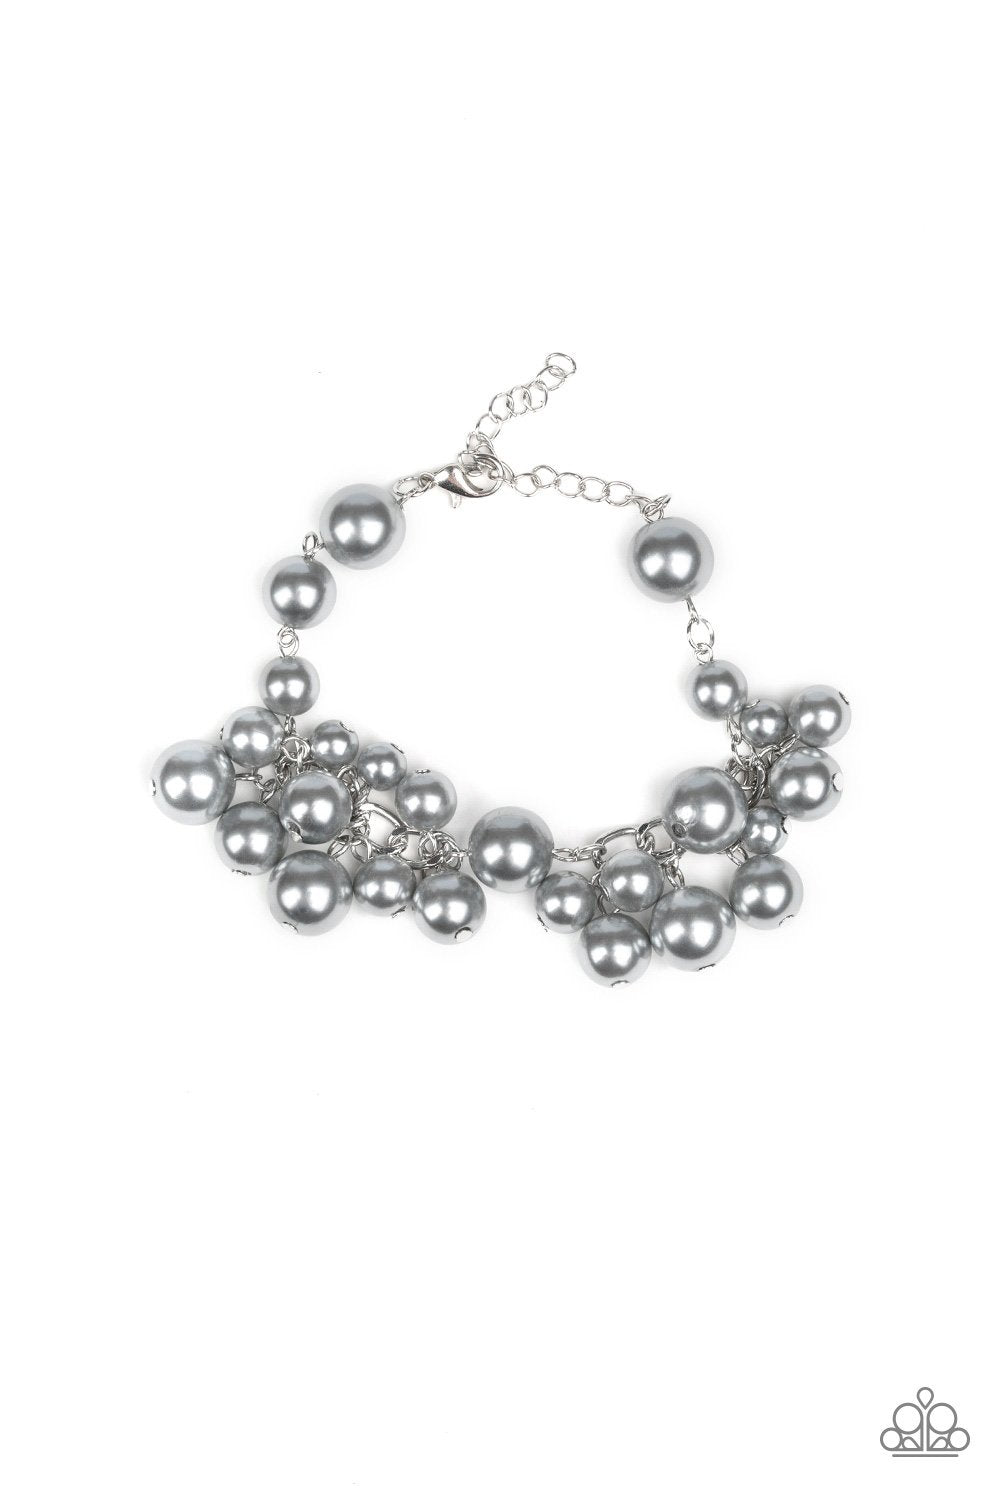 Girls In Pearls Silver Pearl Bracelet - Paparazzi Accessories-CarasShop.com - $5 Jewelry by Cara Jewels